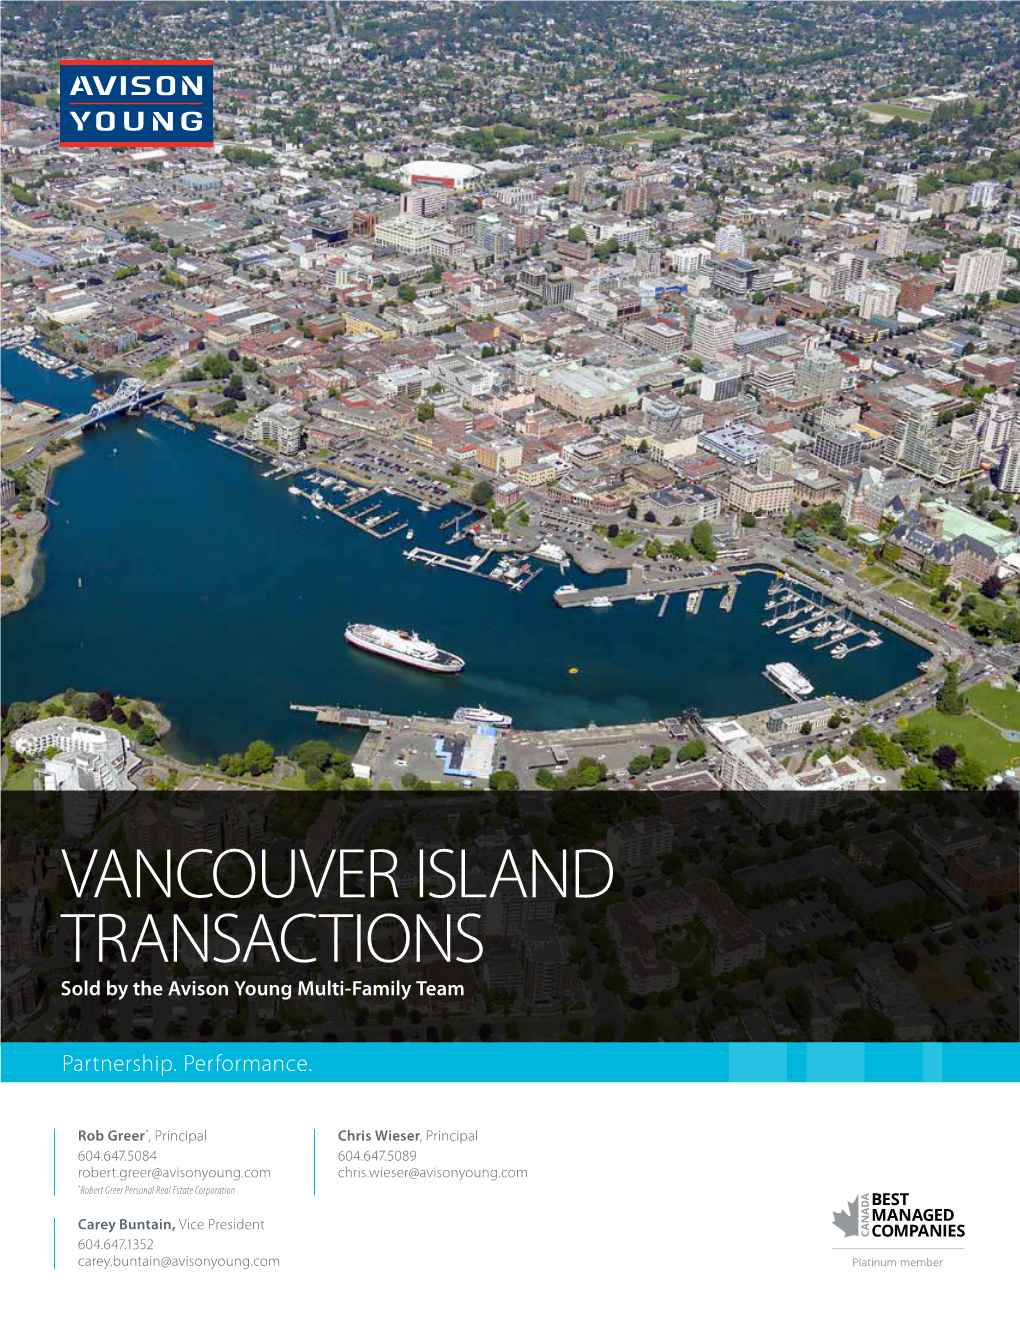 VANCOUVER ISLAND TRANSACTIONS Sold by the Avison Young Multi-Family Team